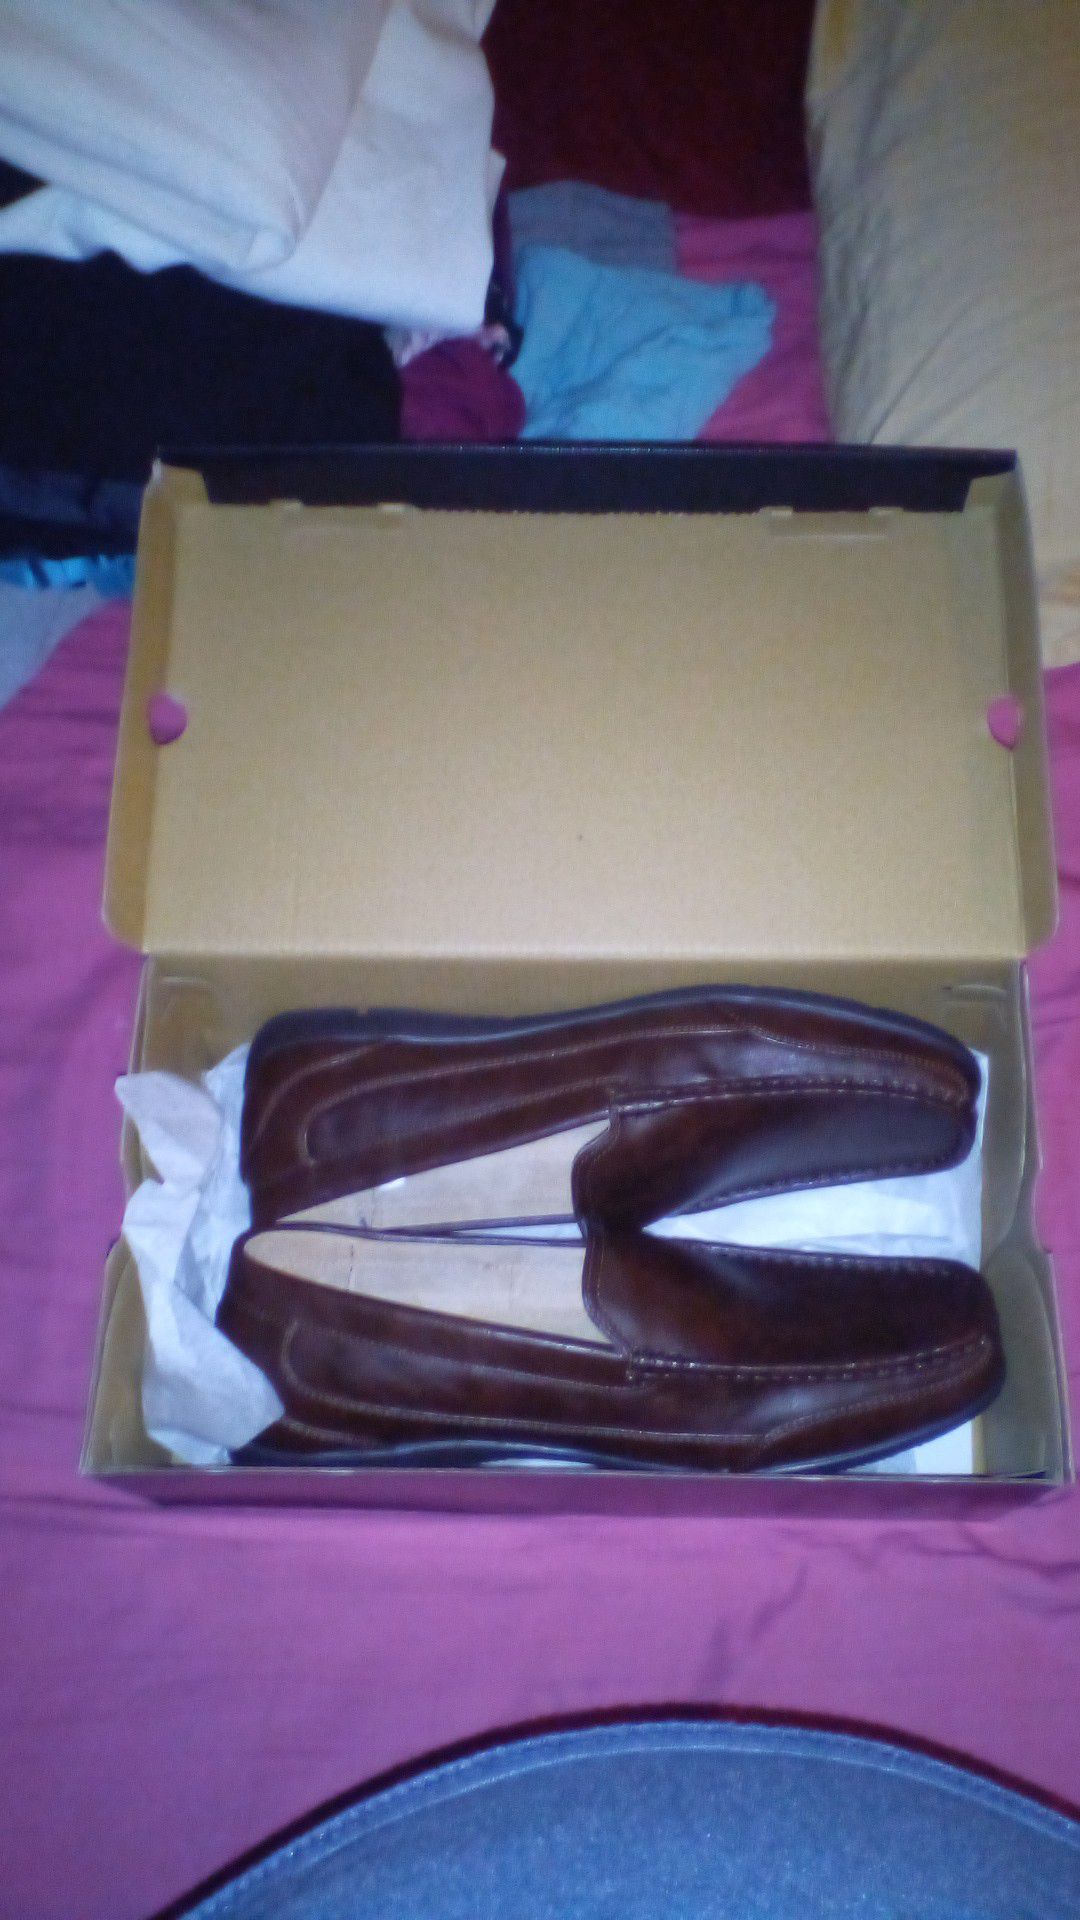 JF brown memory foam shoes new with tag 60 will take 30for them